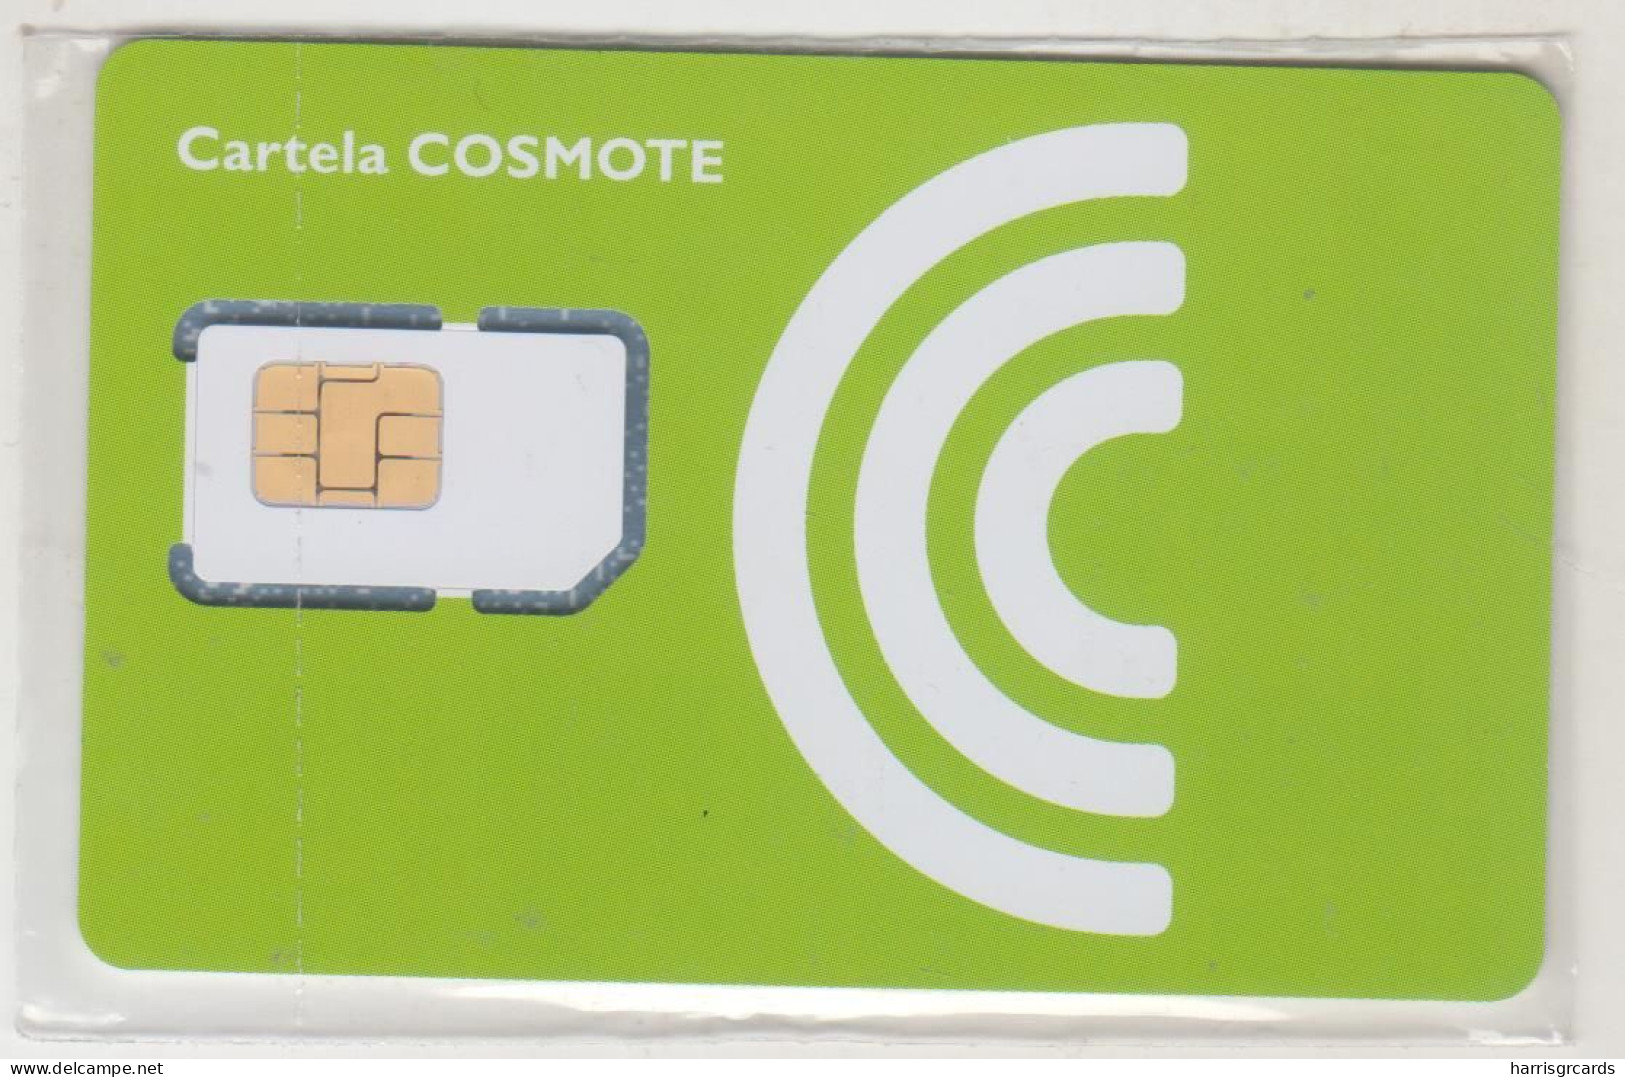 ROMANIA - Cosmote 4th Edition, Cosmote GSM Card, Mint In Blister - Roemenië